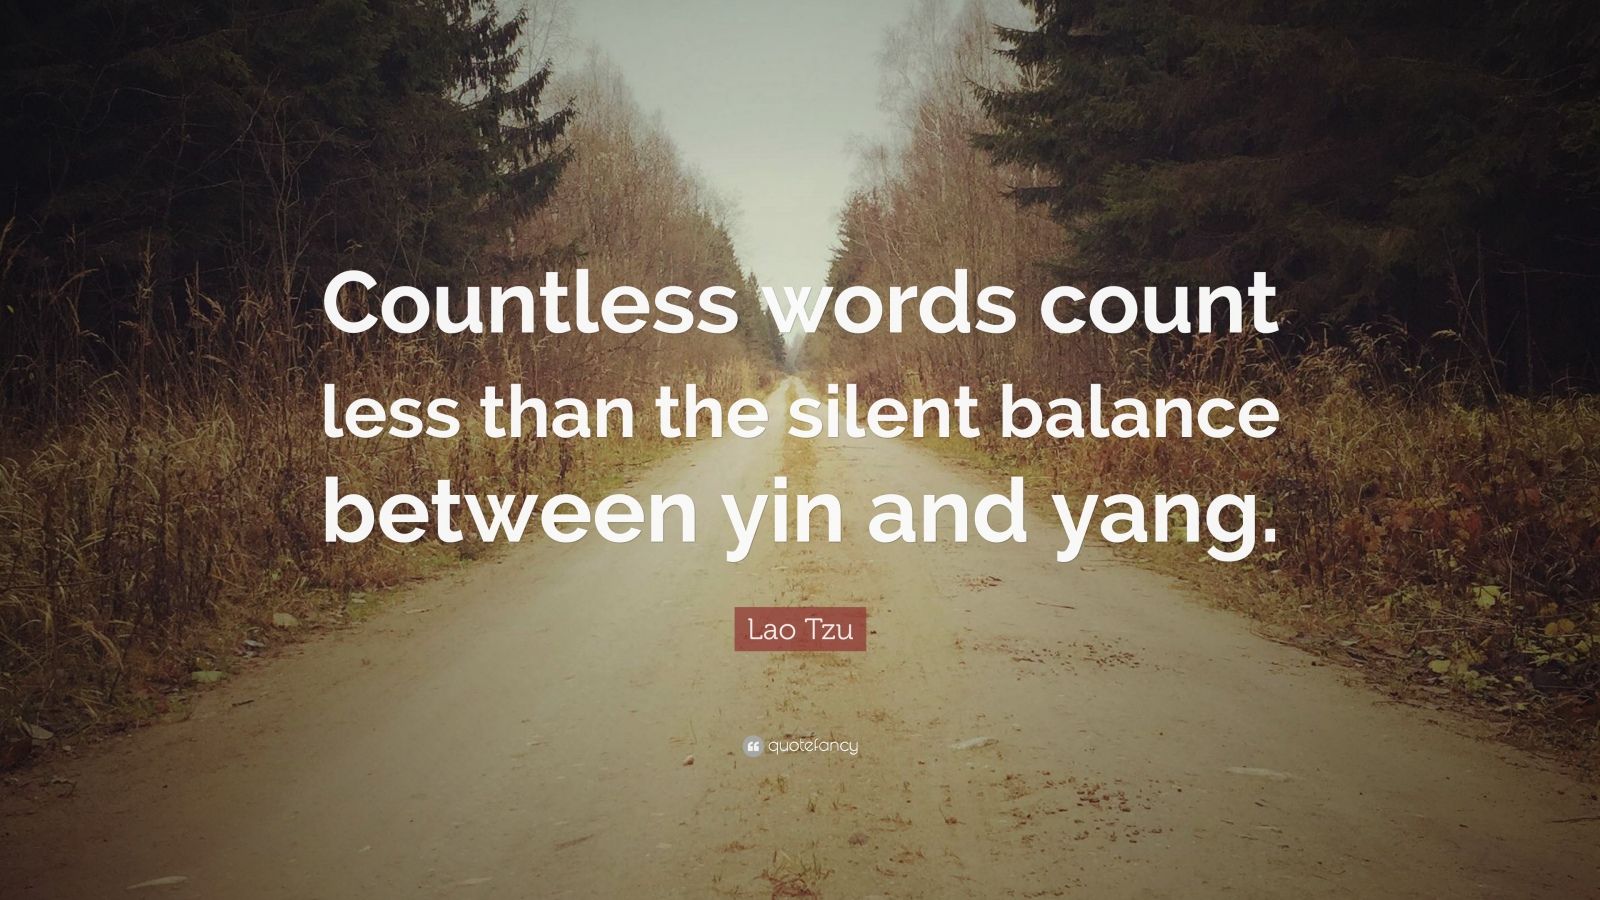 Lao Tzu Quote: “Countless words count less than the silent balance